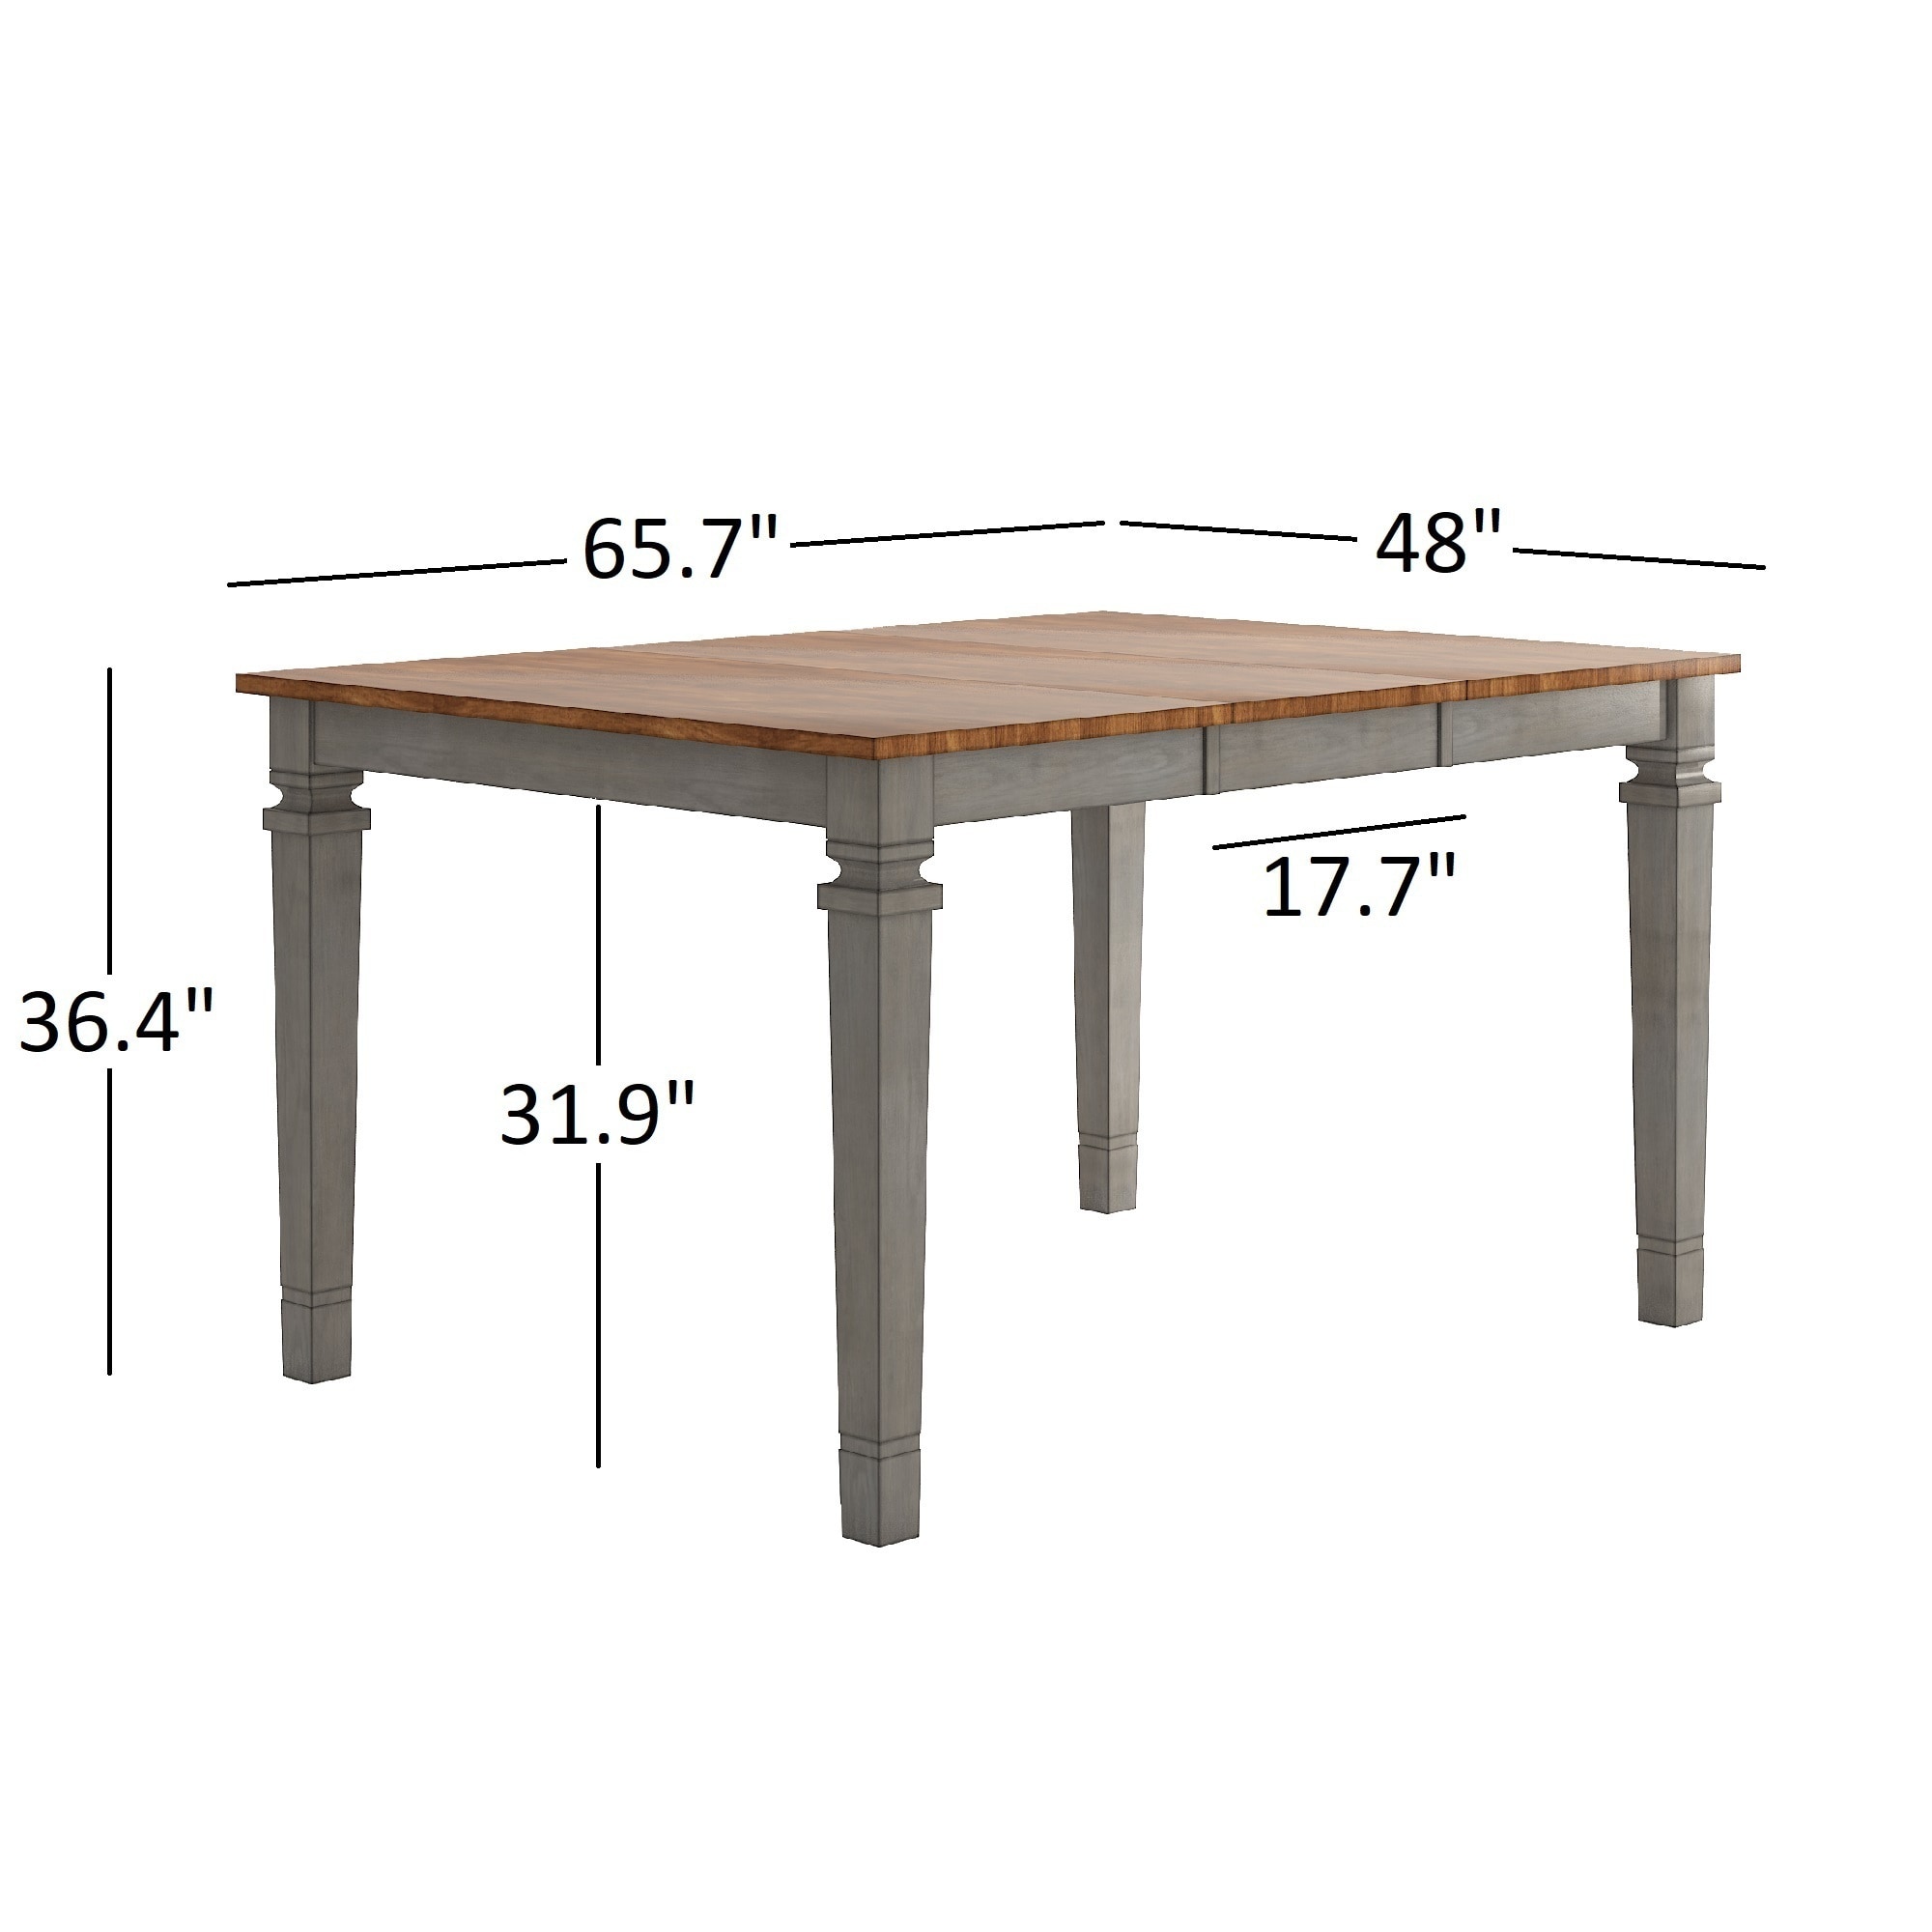 Elena Solid Wood Extendable Counter Height Dining Table By Inspire Q Classic On Sale Overstock 18218114